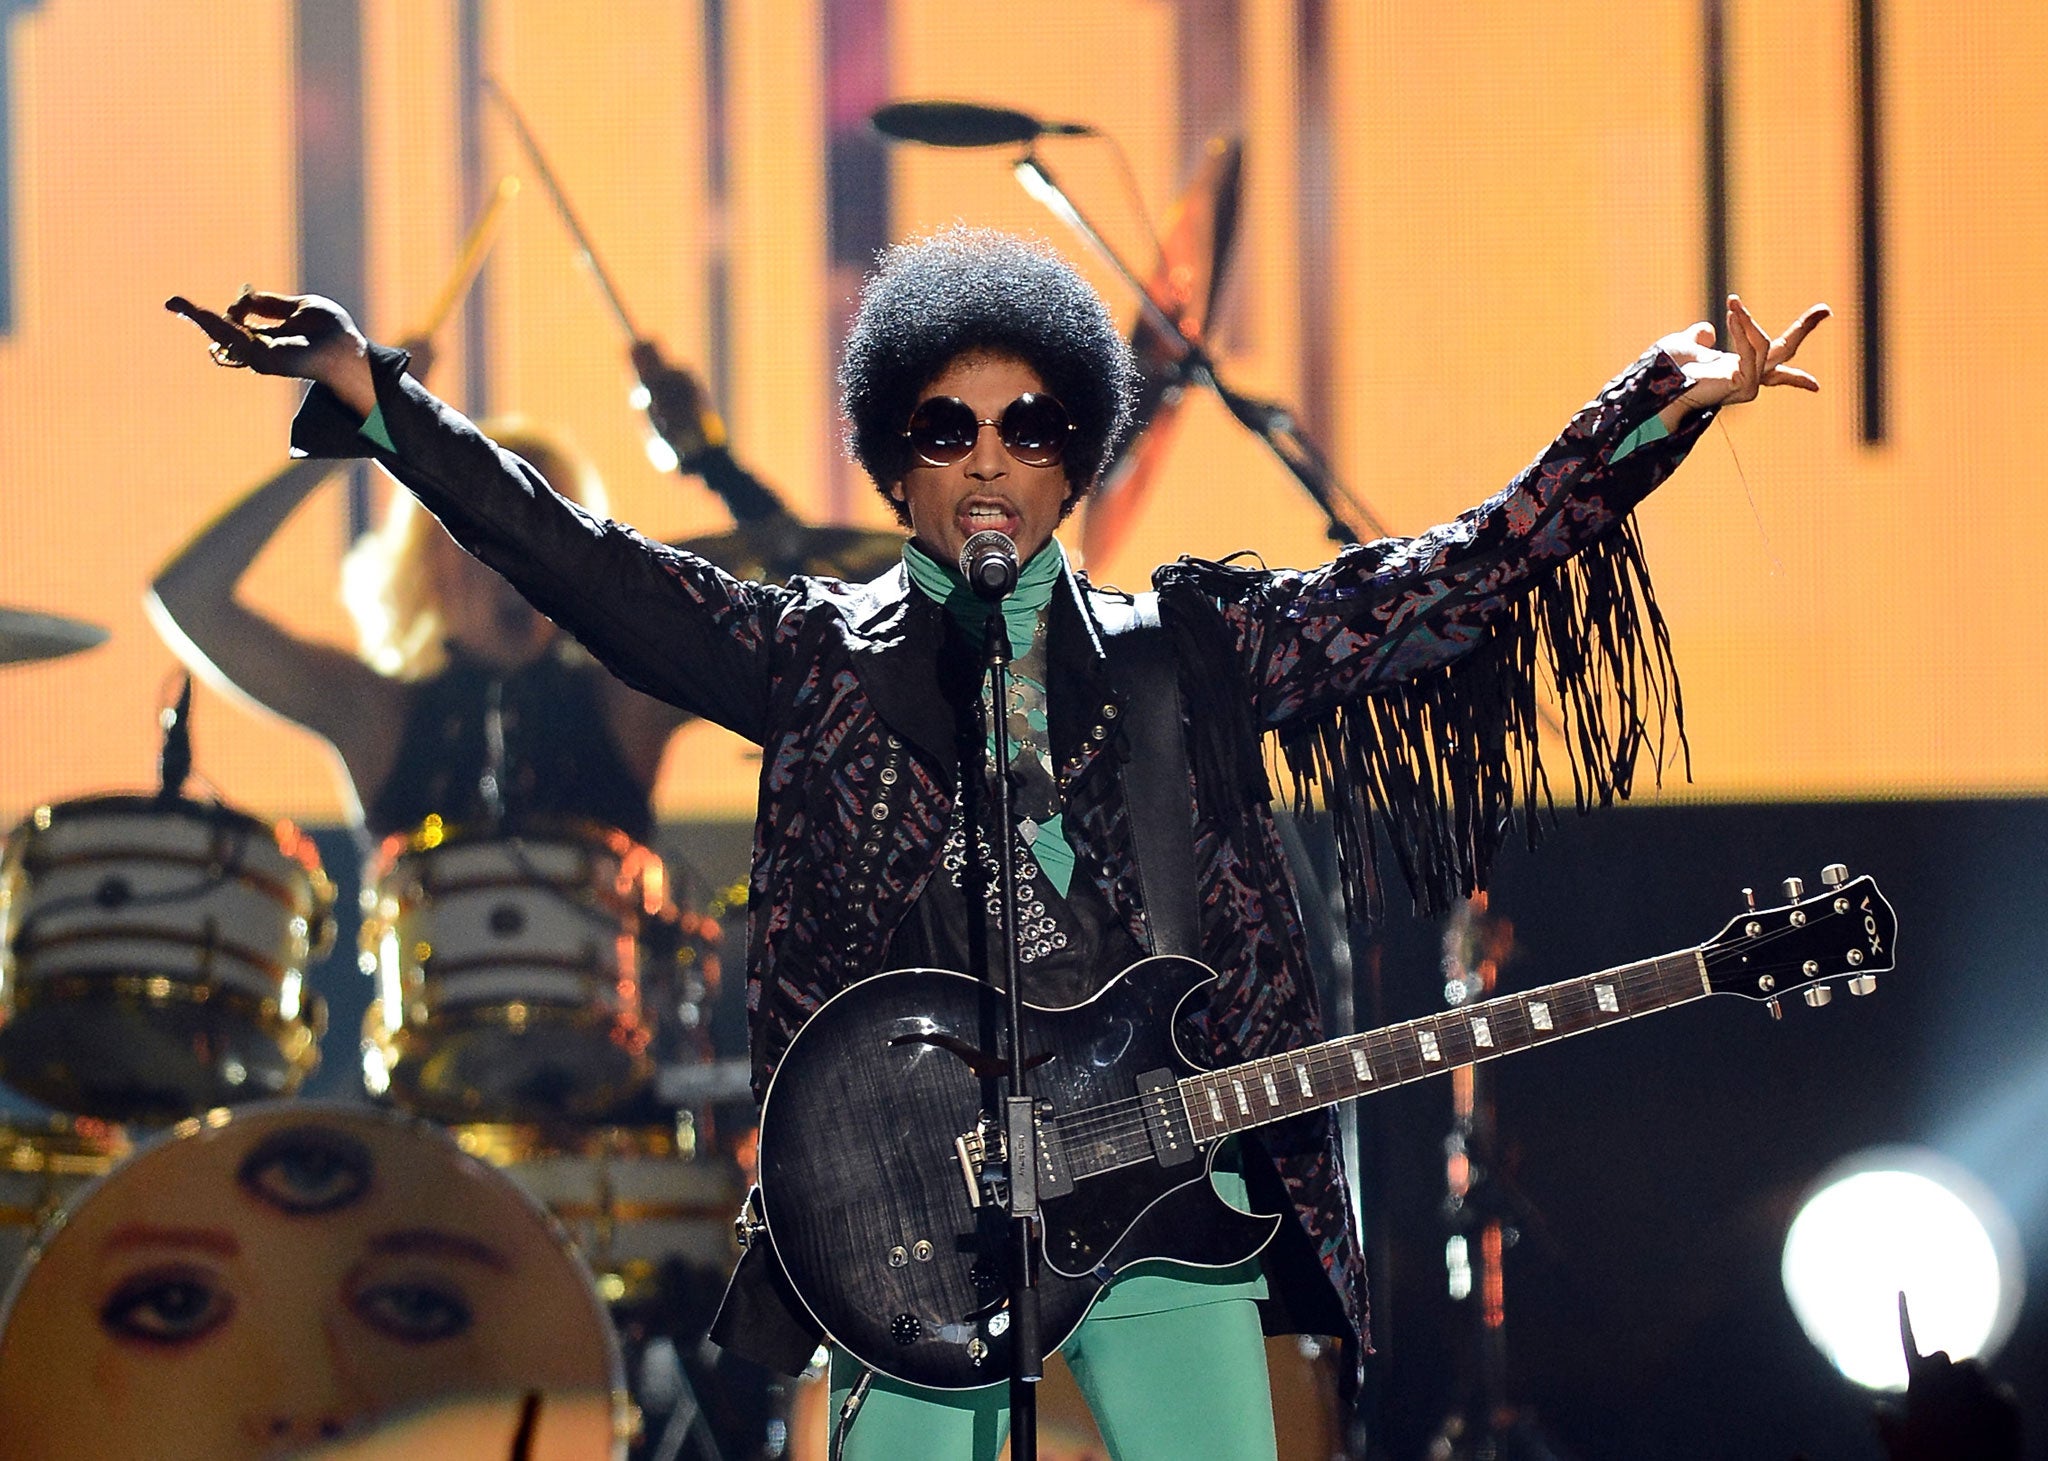 Prince made a big comeback with two new albums in September